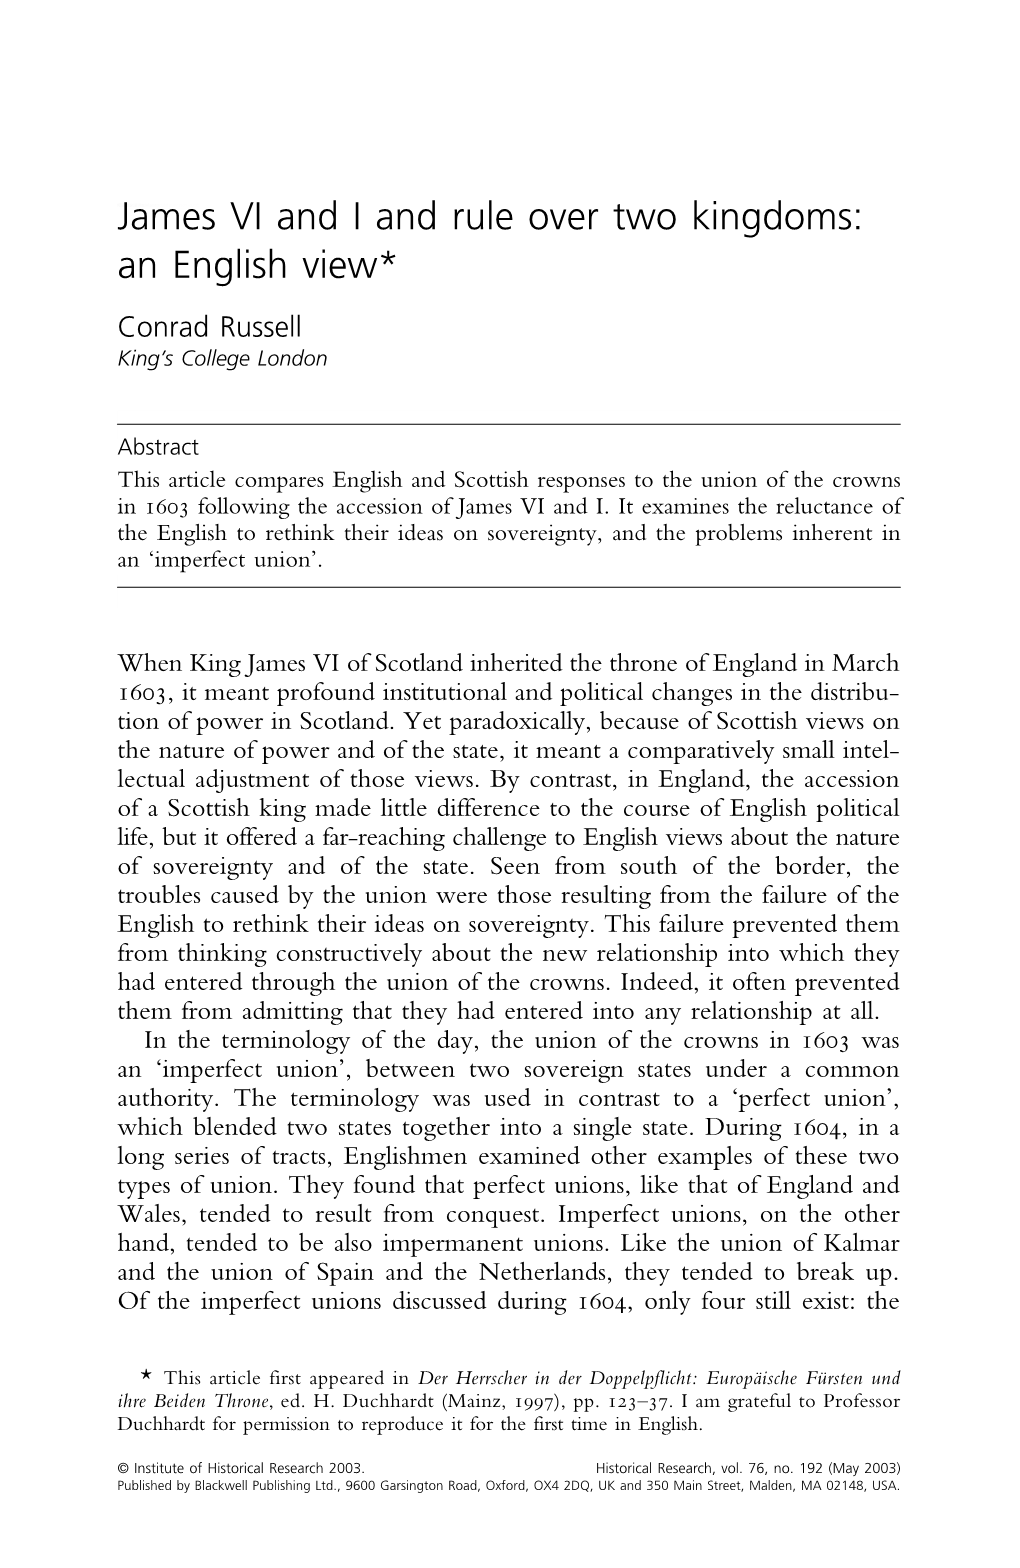 James VI and I and Rule Over Two Kingdoms: an English View*